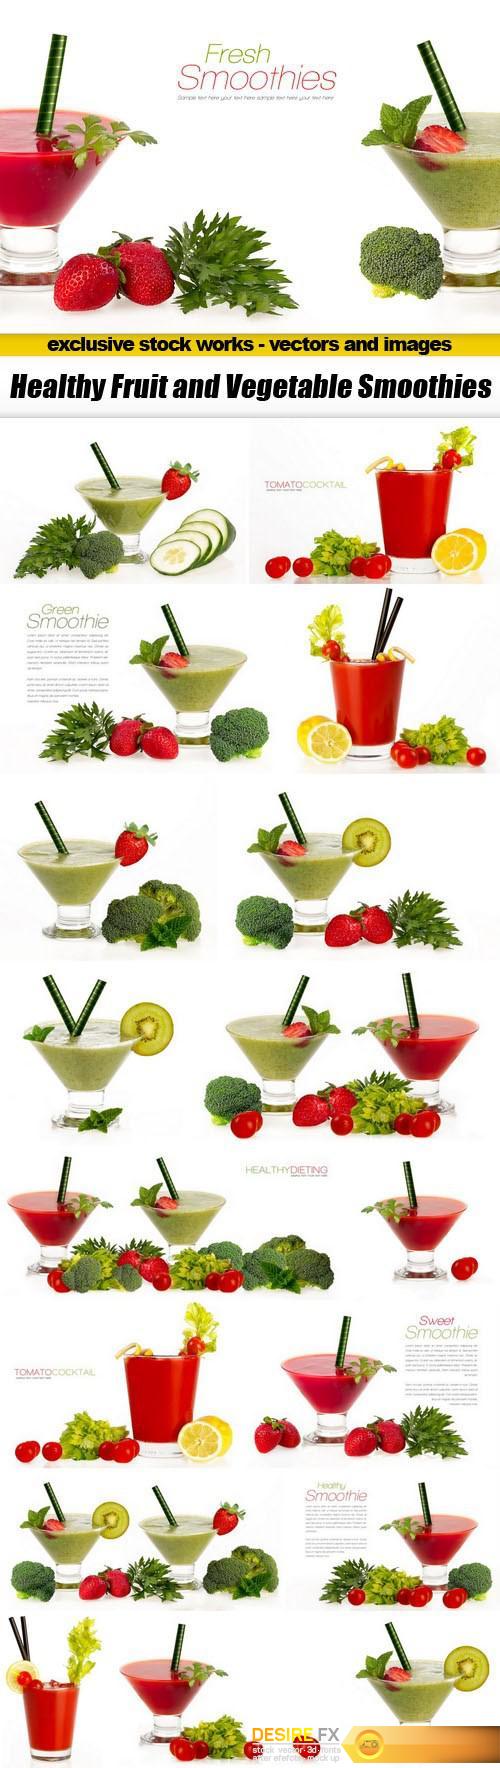 Healthy Fruit and Vegetable Smoothies - 18xUHQ JPEG